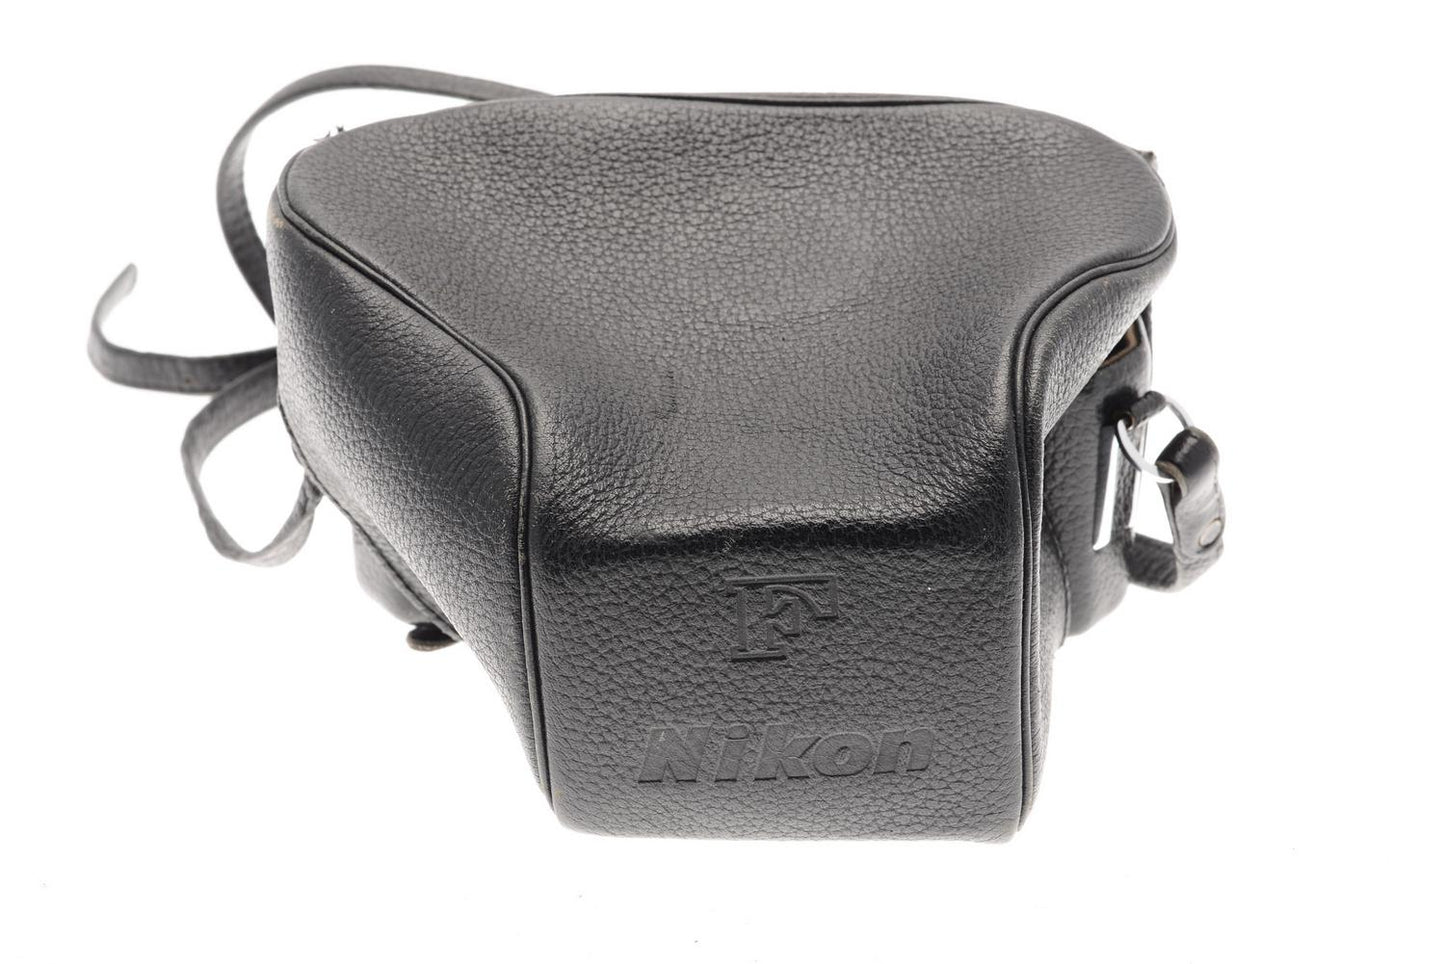 Nikon Leather Ever-ready Case for F with Eyelevel Plain Prism Finder - Accessory